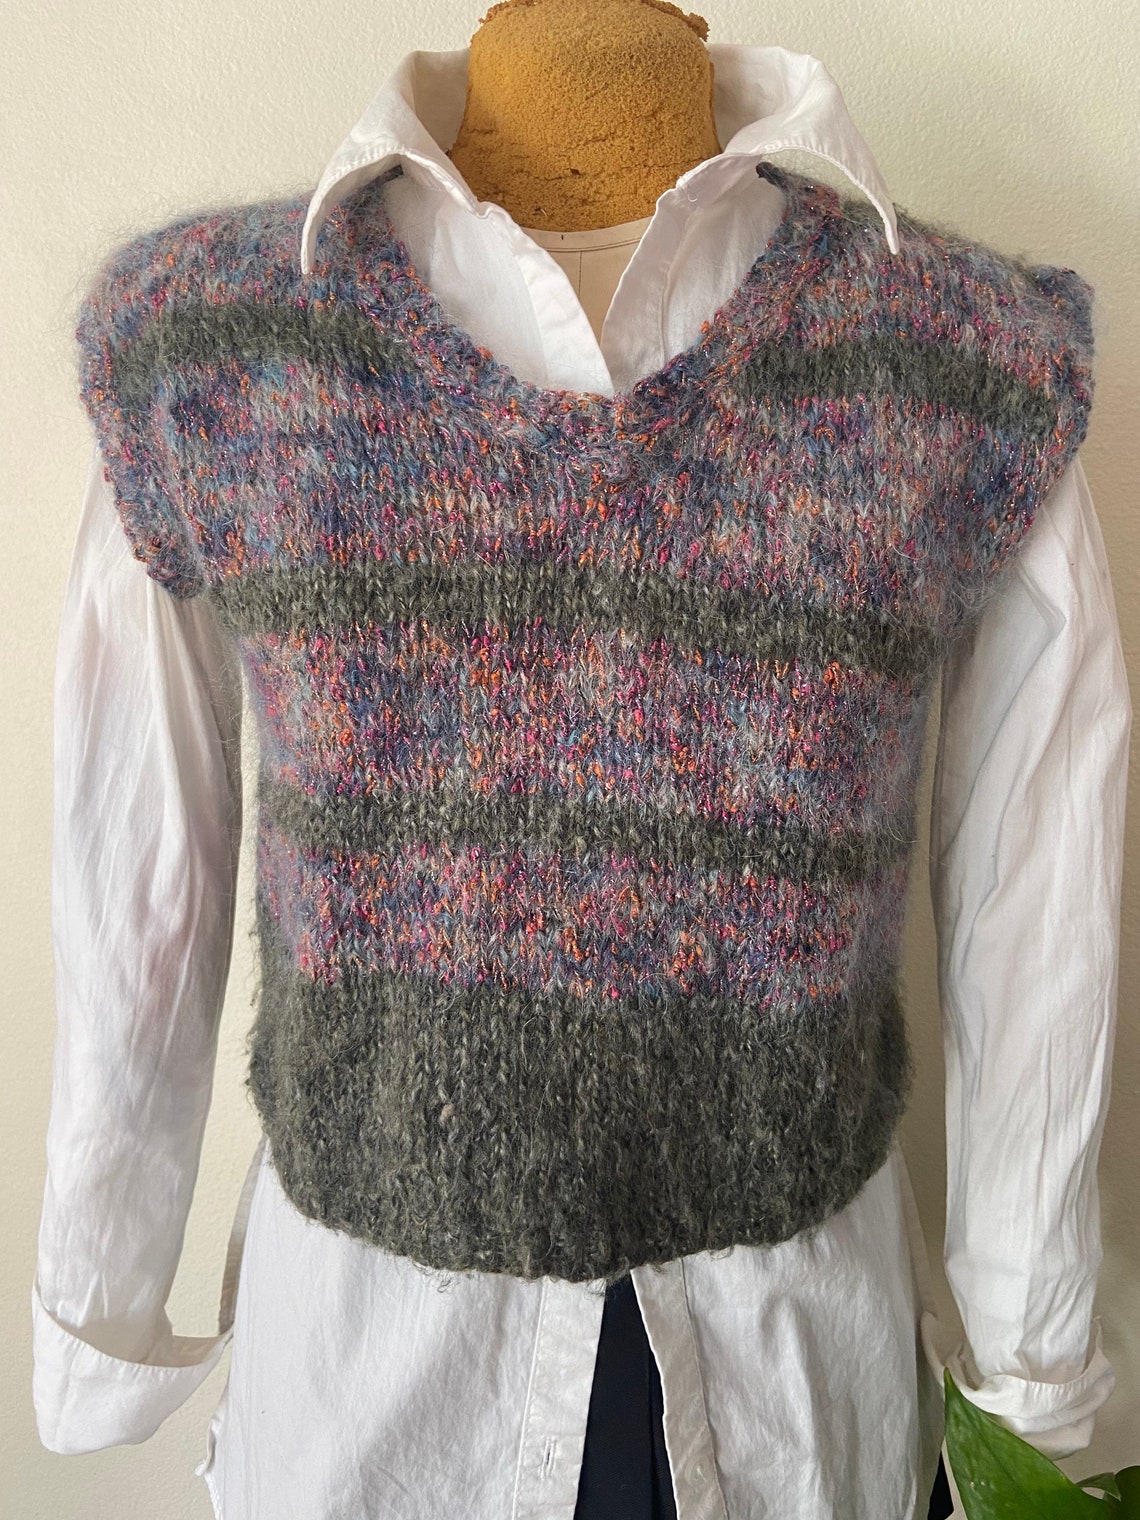 Mohair wool blend sweater vest top | Etsy